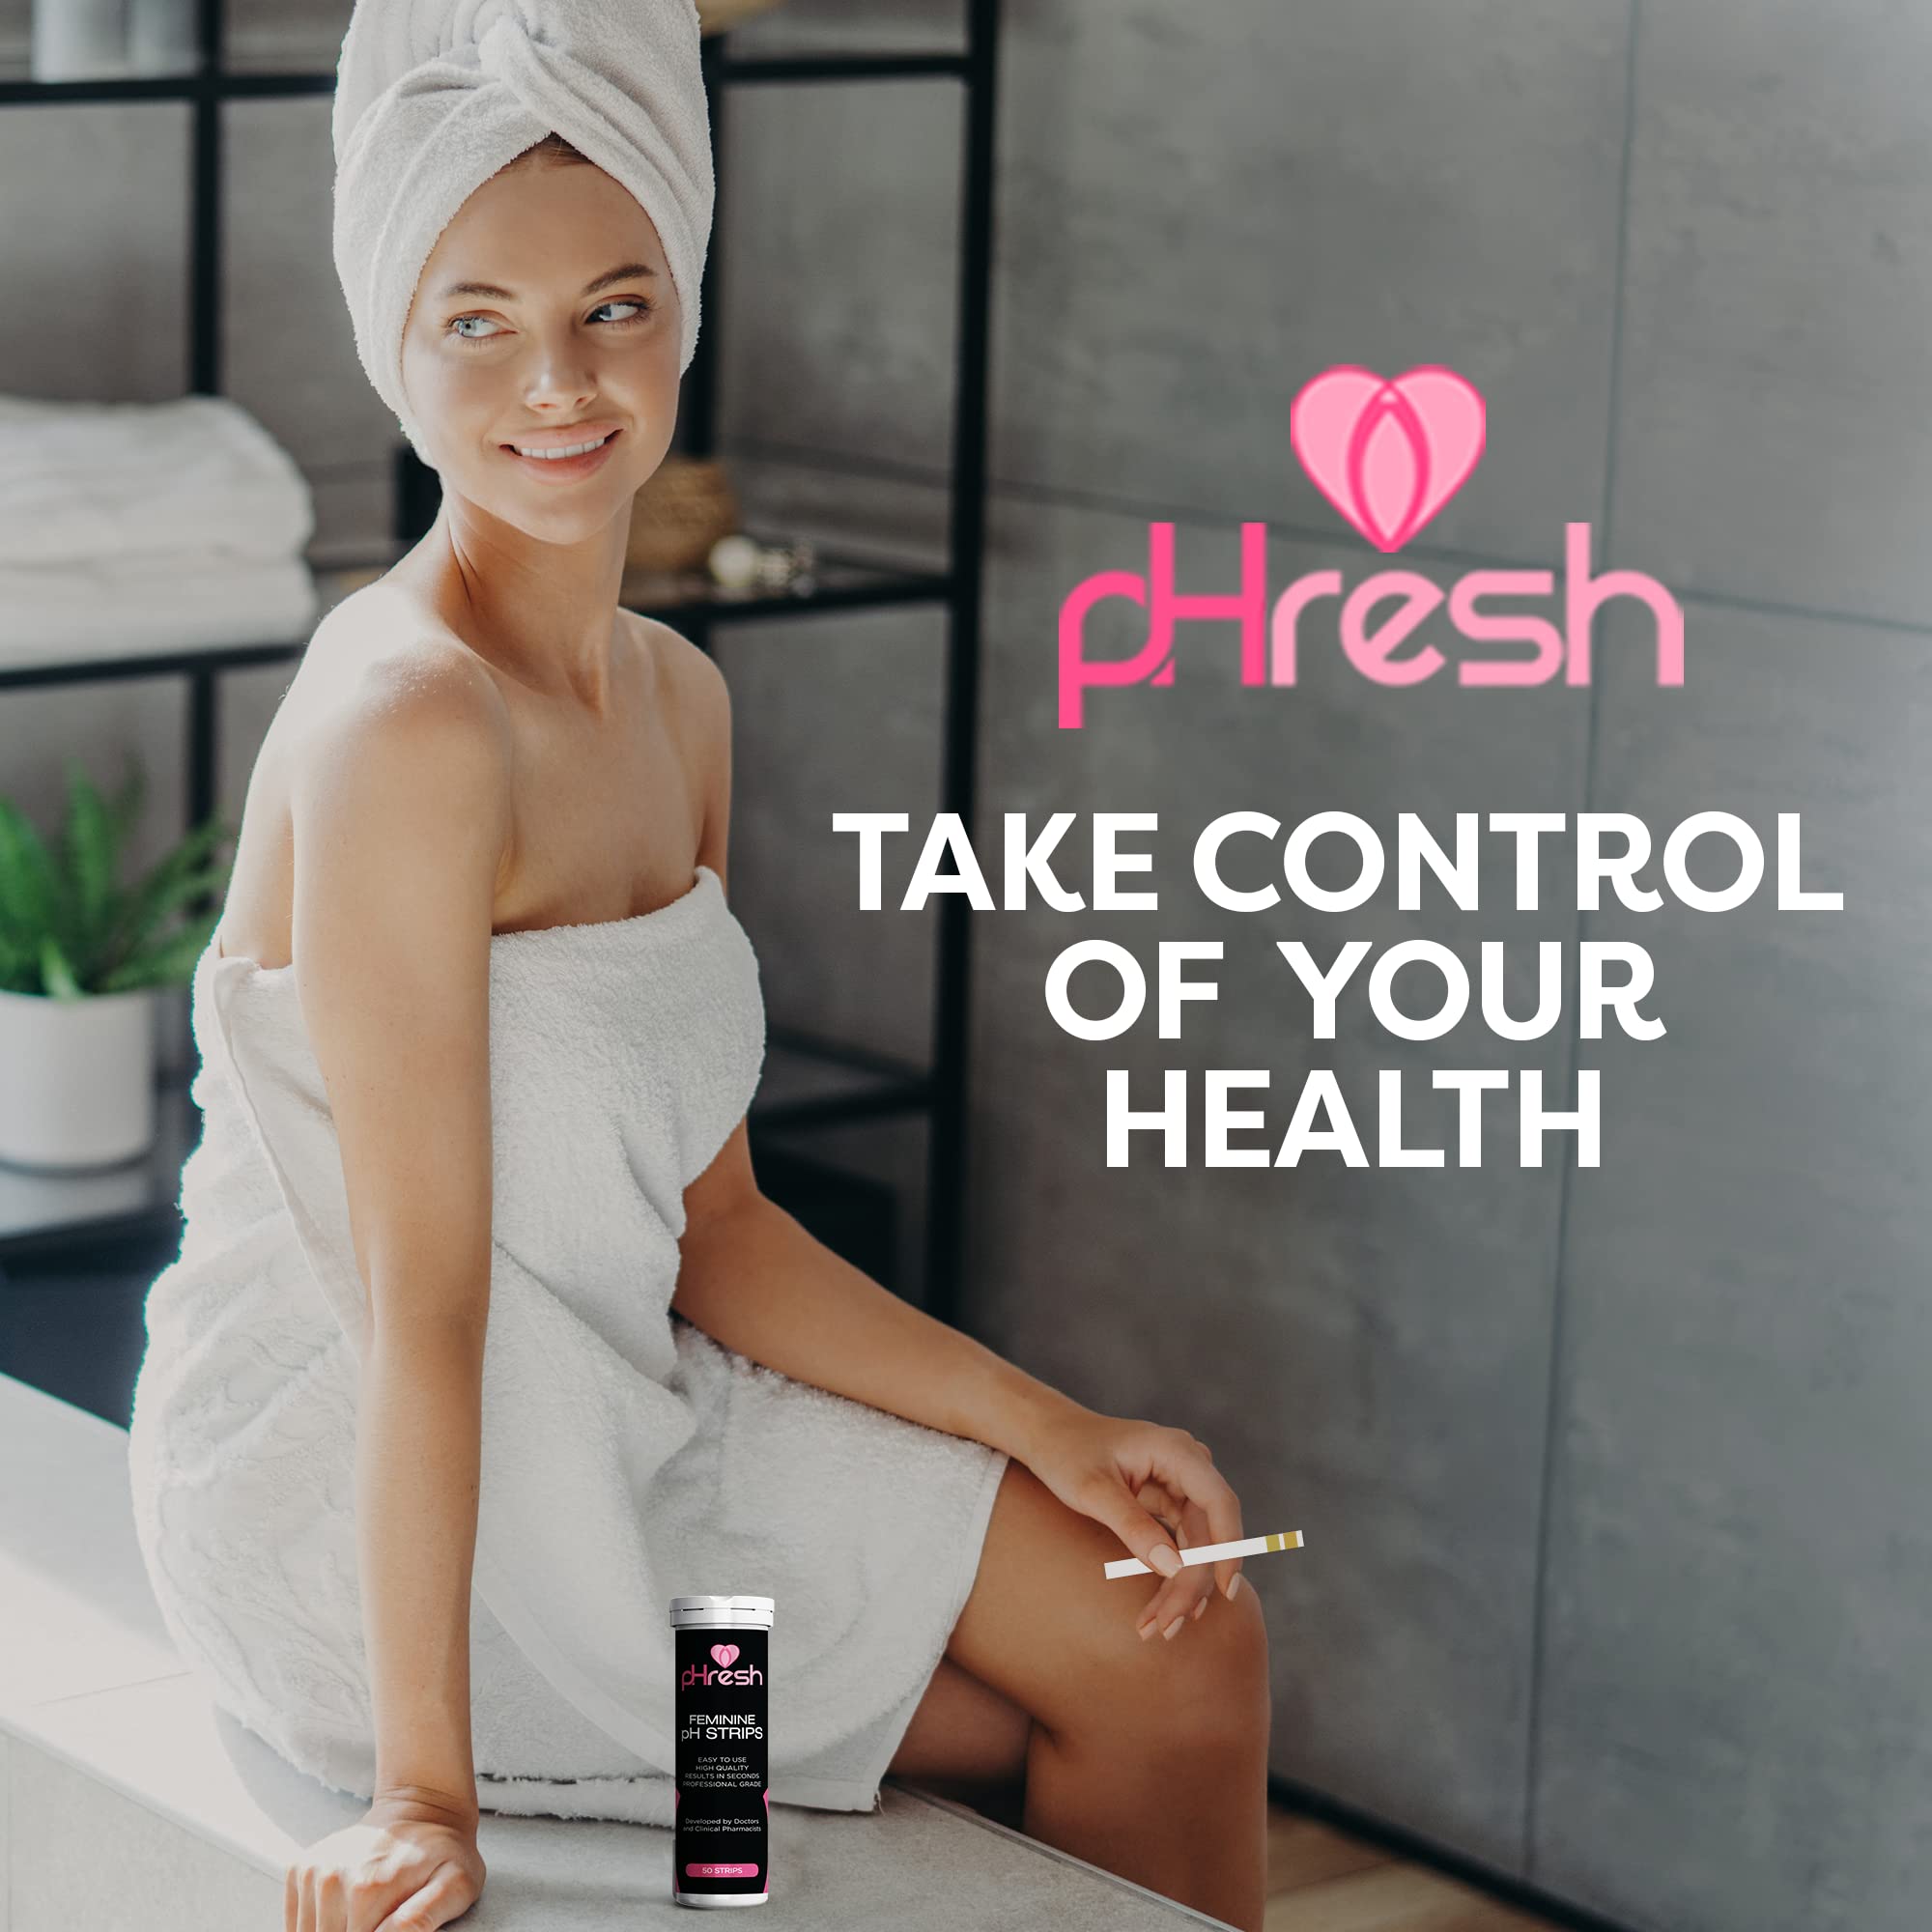 pHresh Vaginal pH Test Strips for Women - Measures Acidity, Alkalinity and pH Balance for Women - pH Strips for Bacterial Vaginosis Treatment & Vaginal Health Monitoring - Quick & Accurate Results